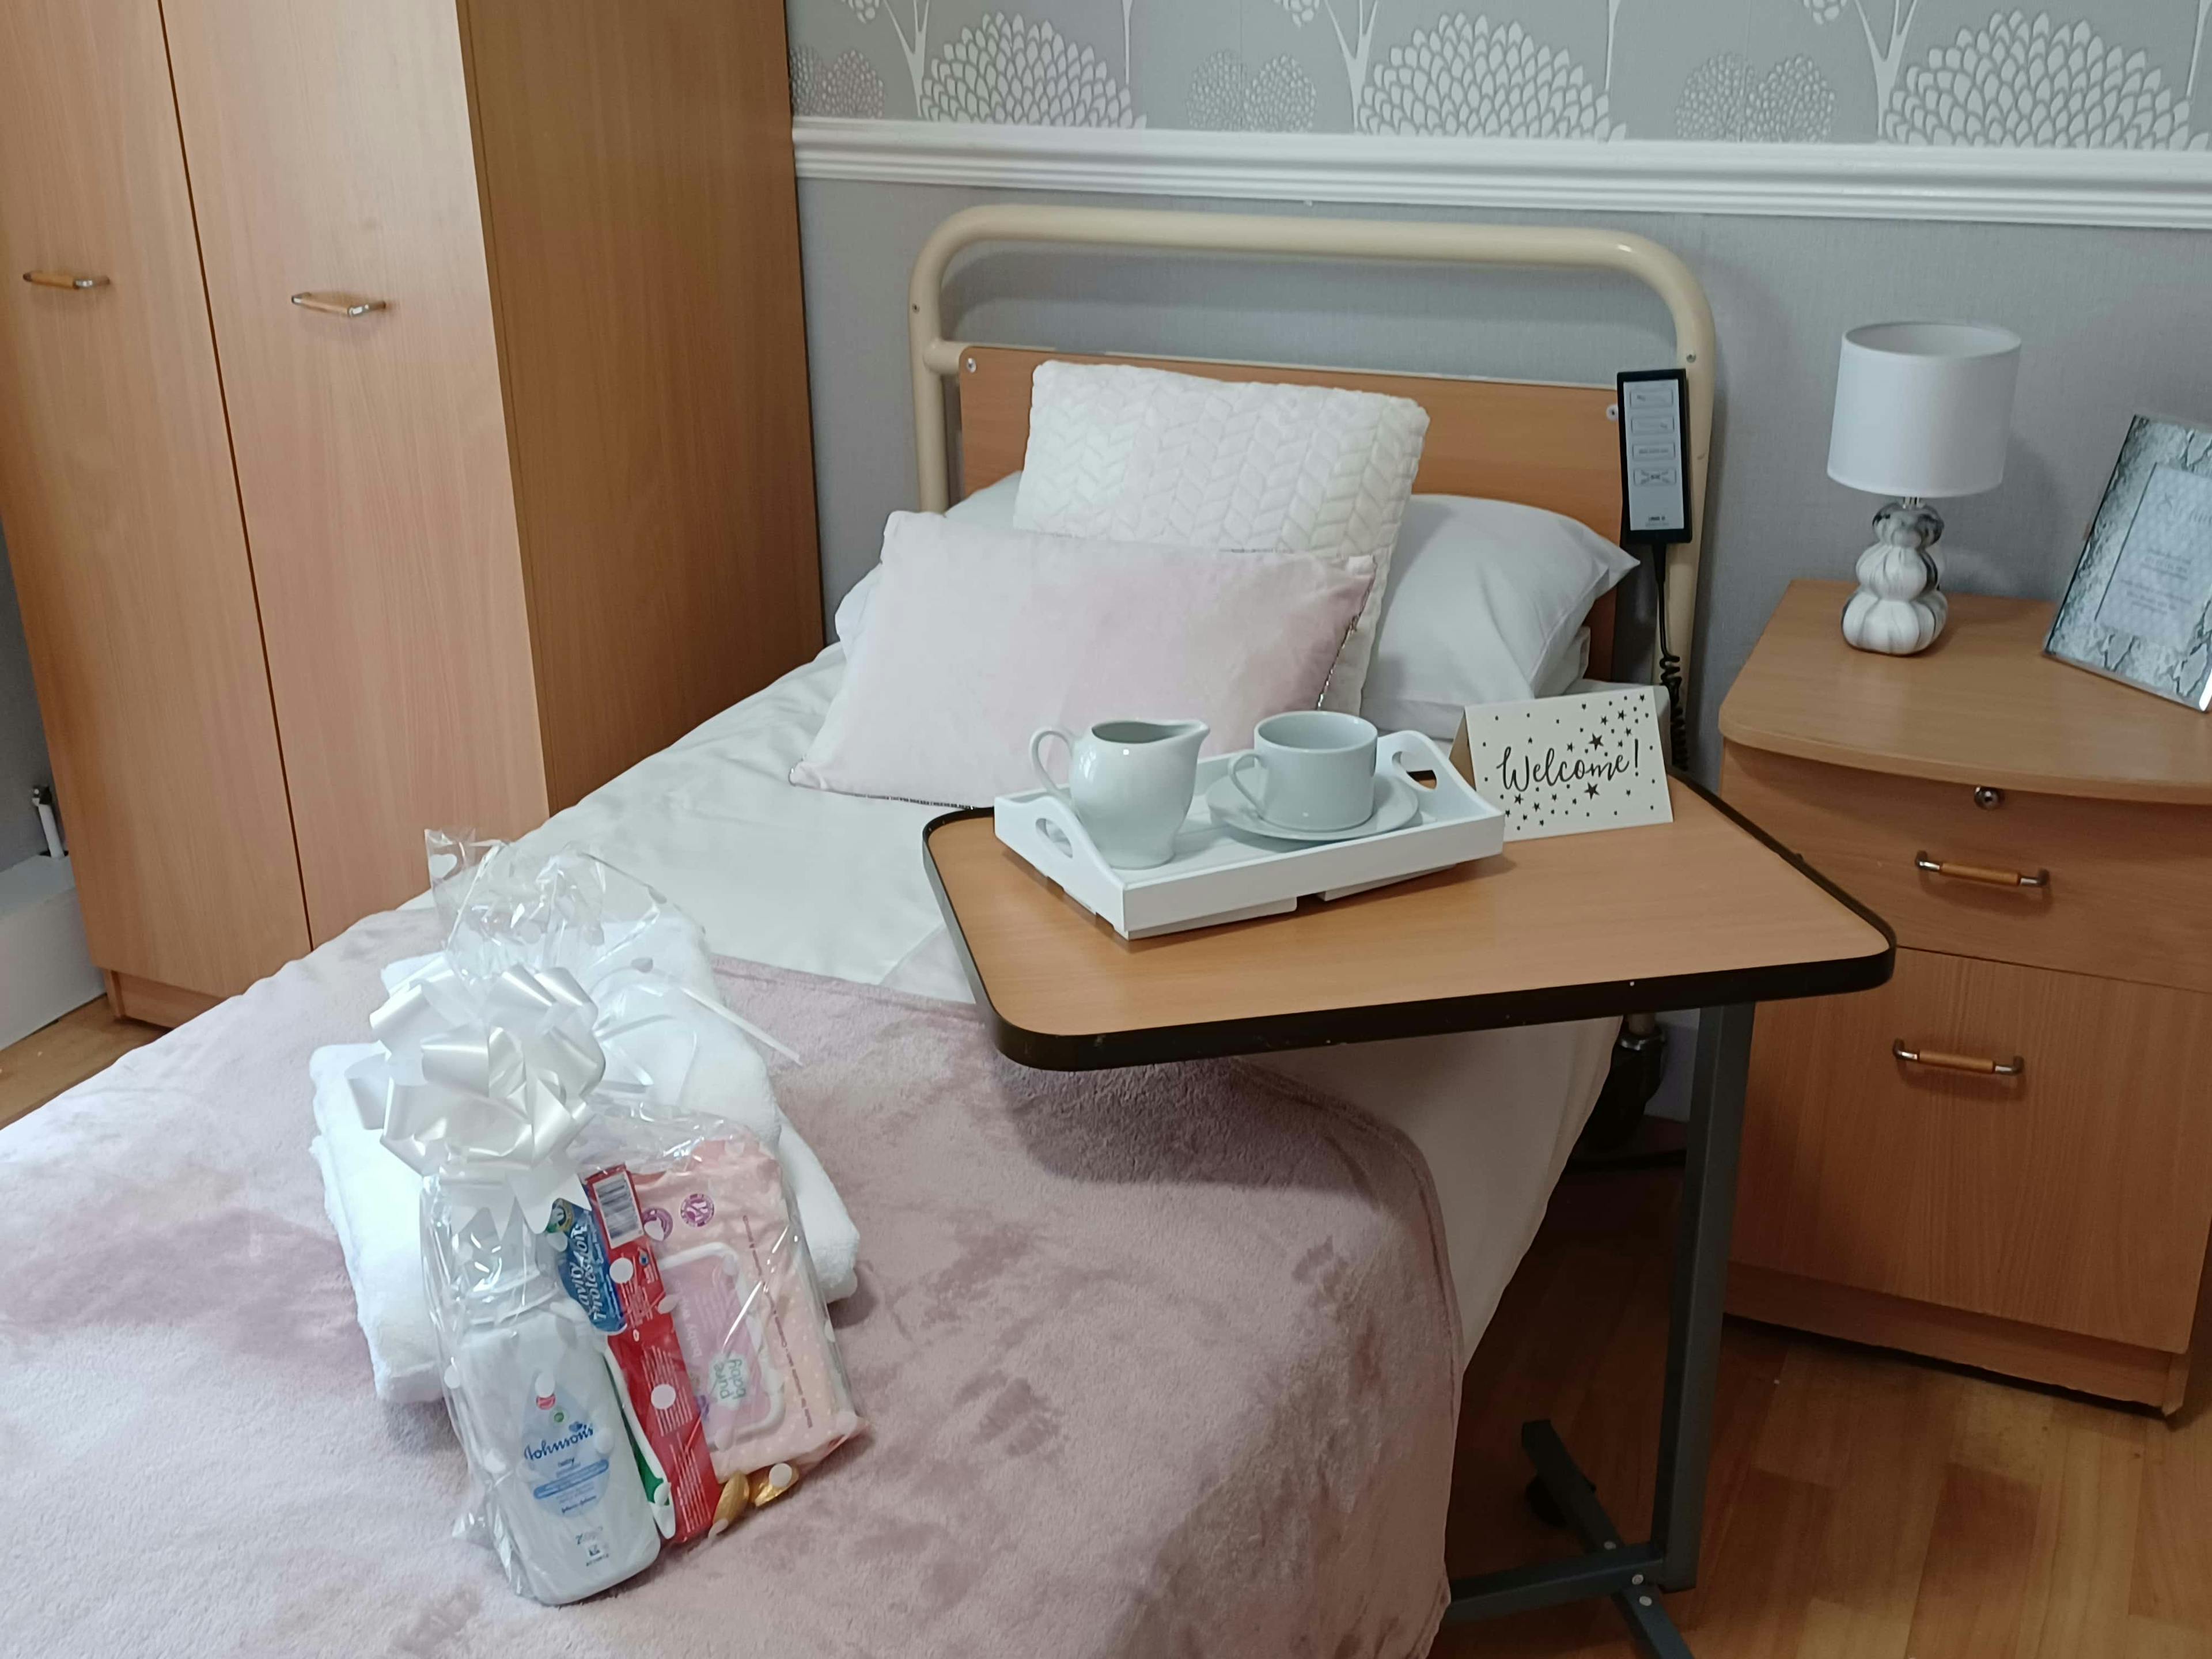 Bedroom of Orchard care home in Liverpool, Merseyside